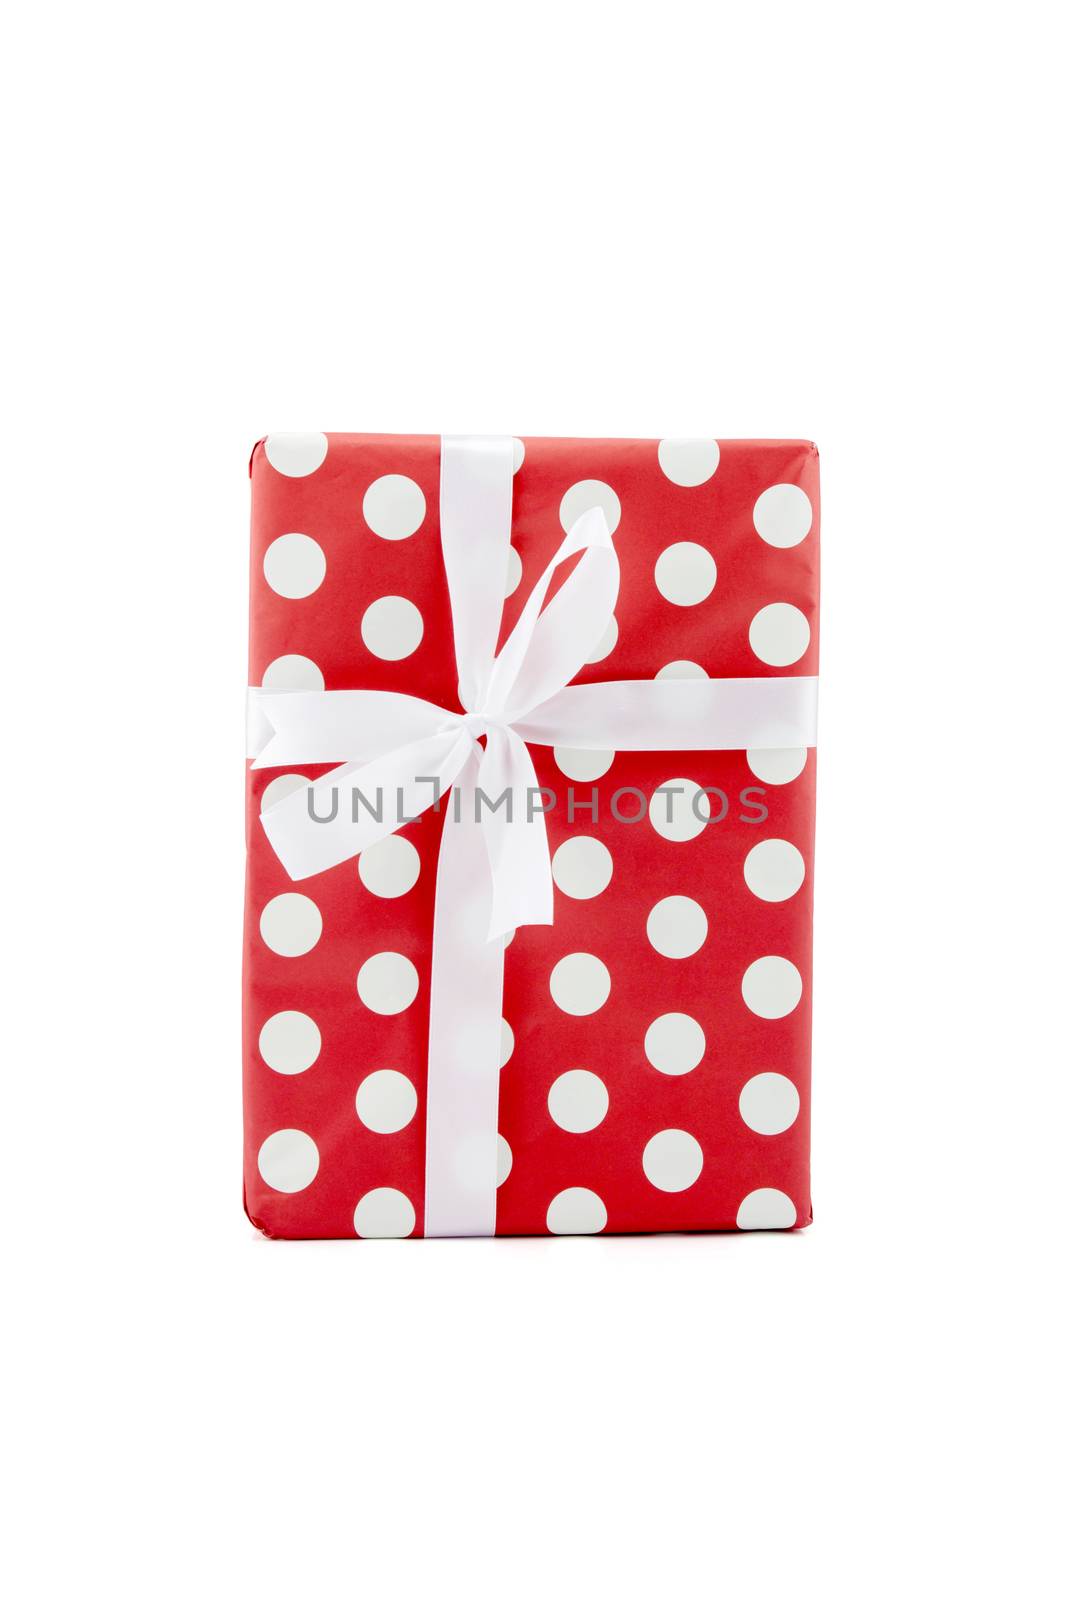 Red gift box and white ribbon in season Christmas and new year isolated on white background, luxury present for birthday or anniversary with surprise in package for happy, holiday concept.